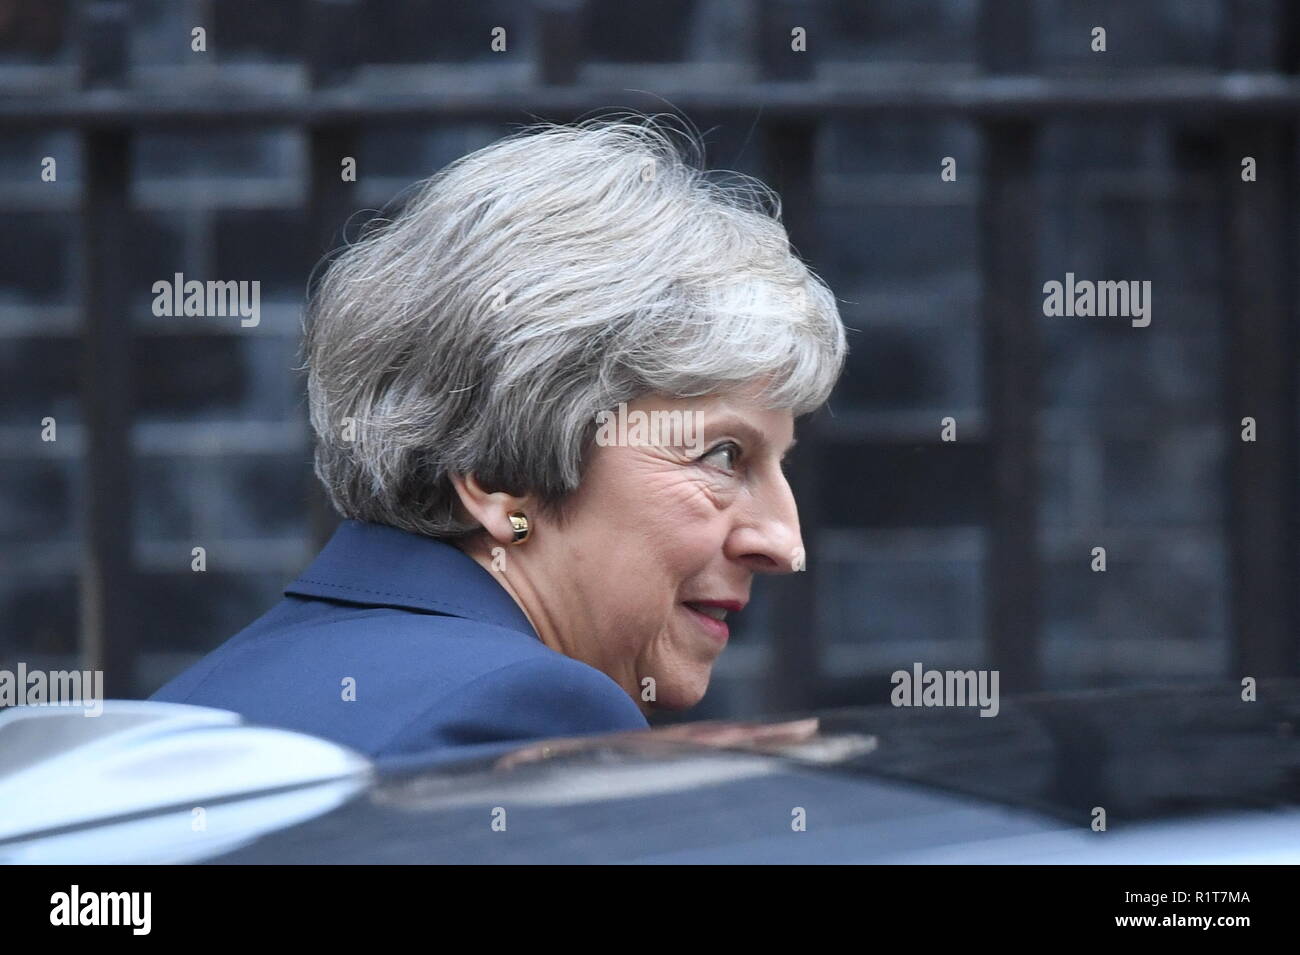 Prime Minister Theresa May leaving 10 Downing Street, London, ahead of Prime Minister's Questions. Stock Photo